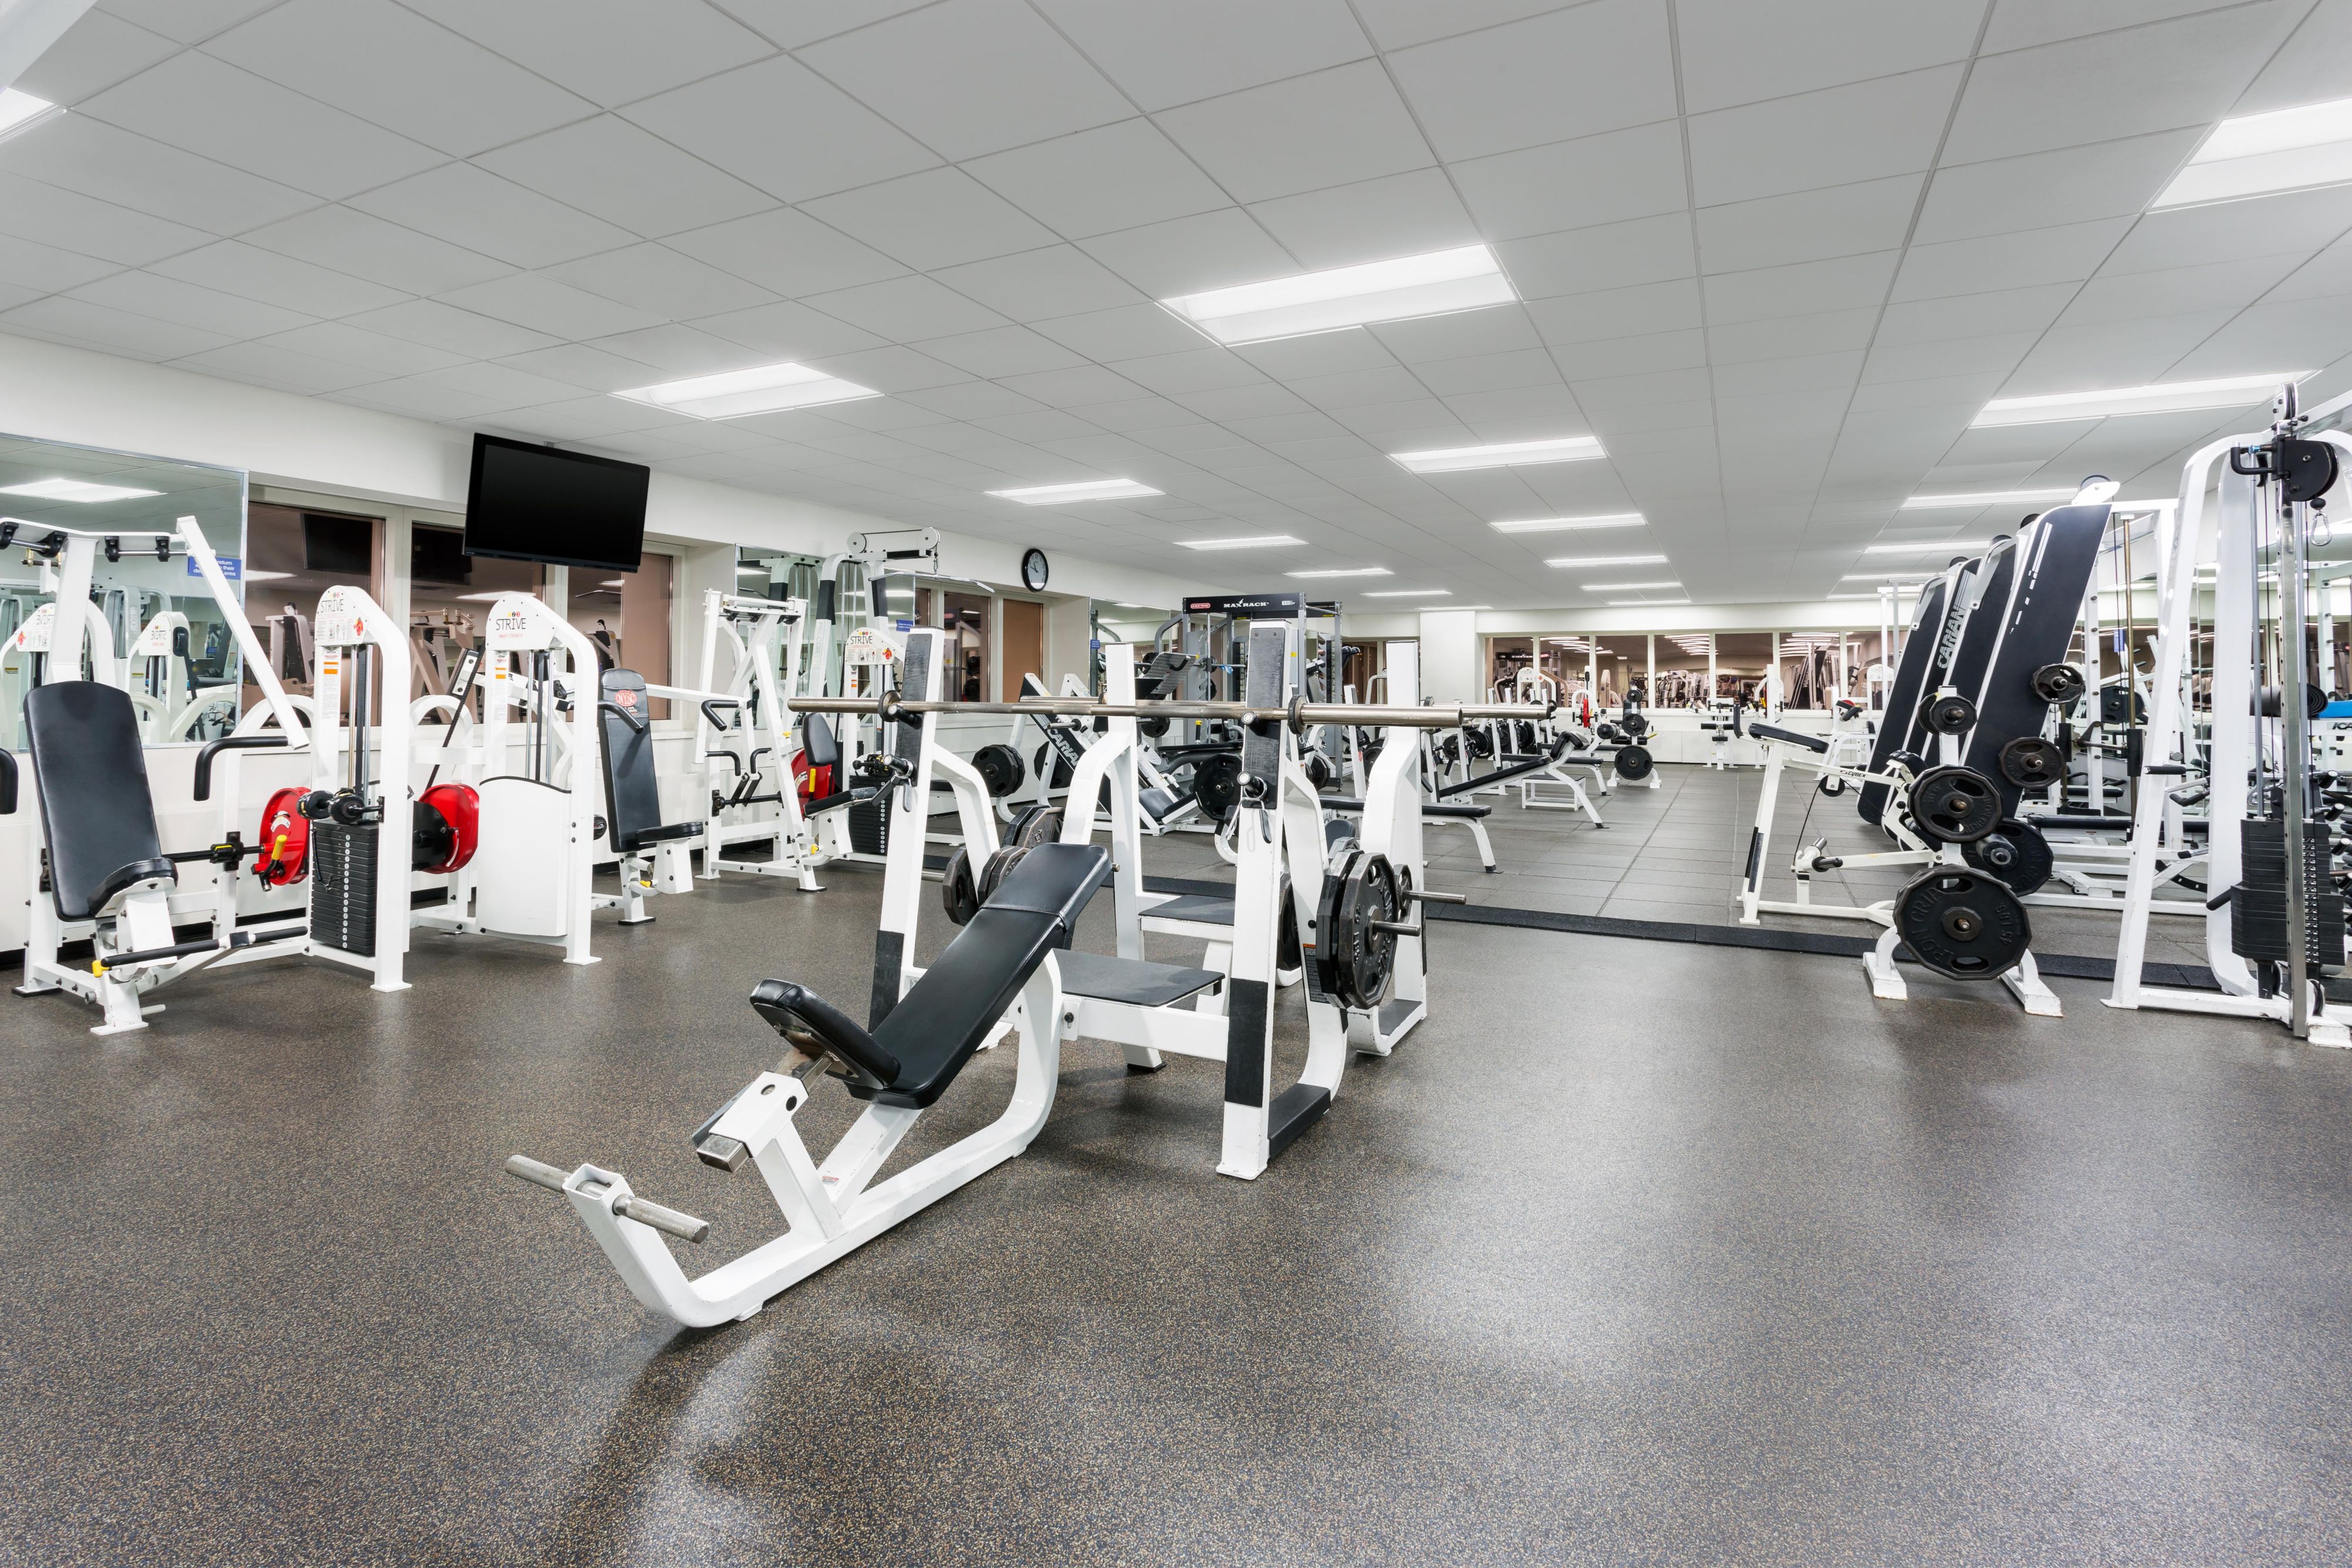 New York Sports Club state of the art fitness center.